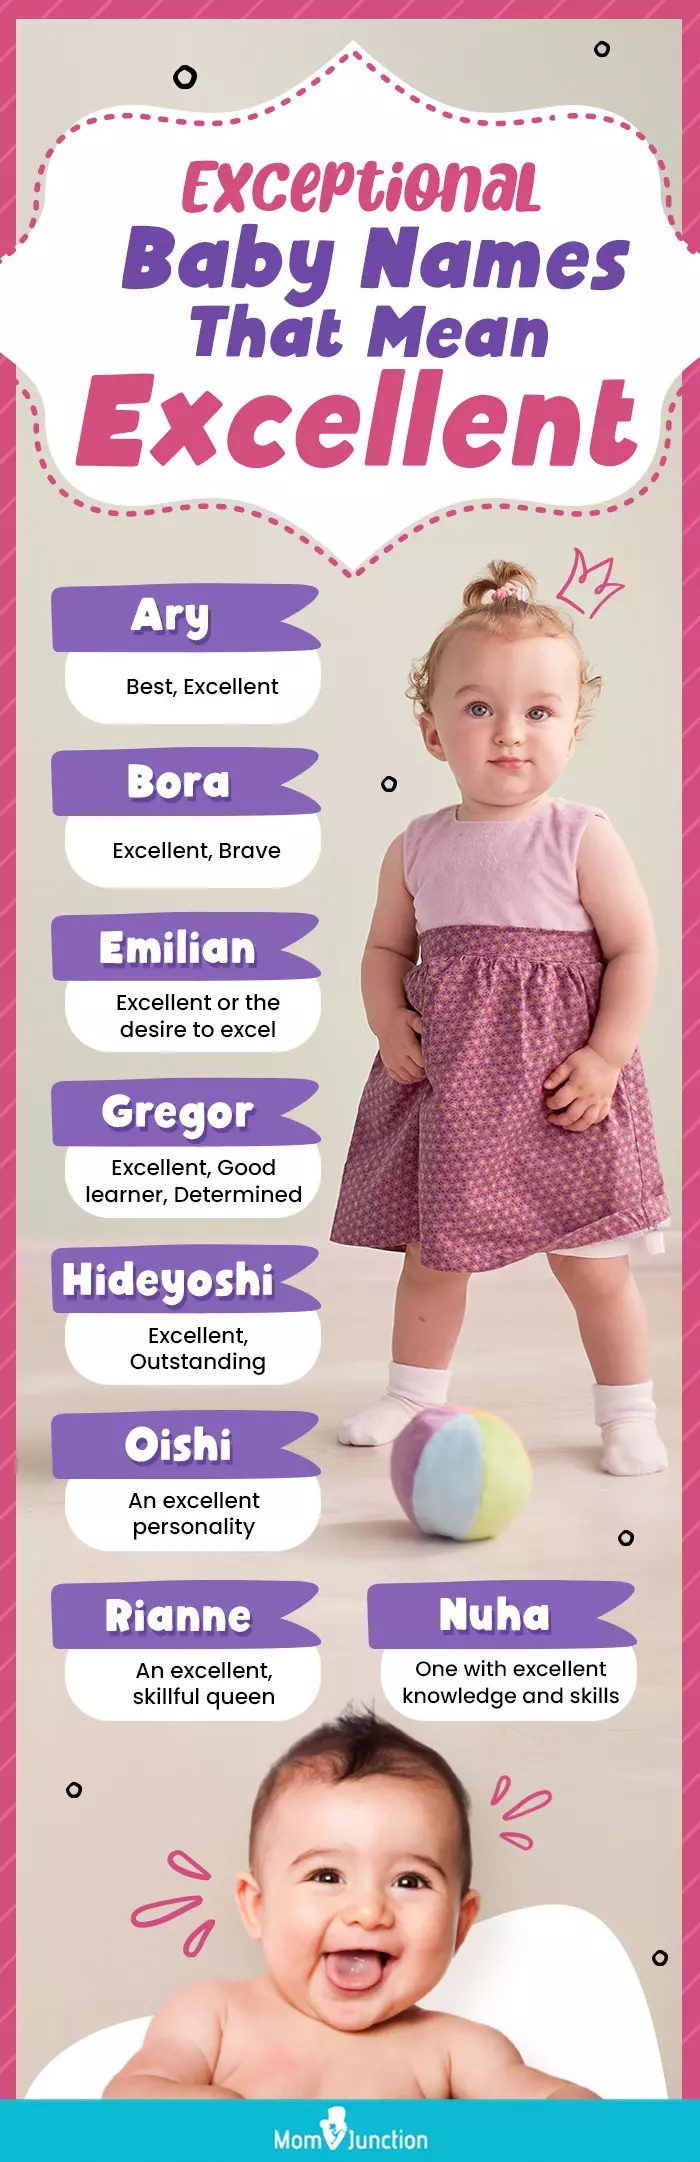 exceptional baby names that mean excellent (infographic)